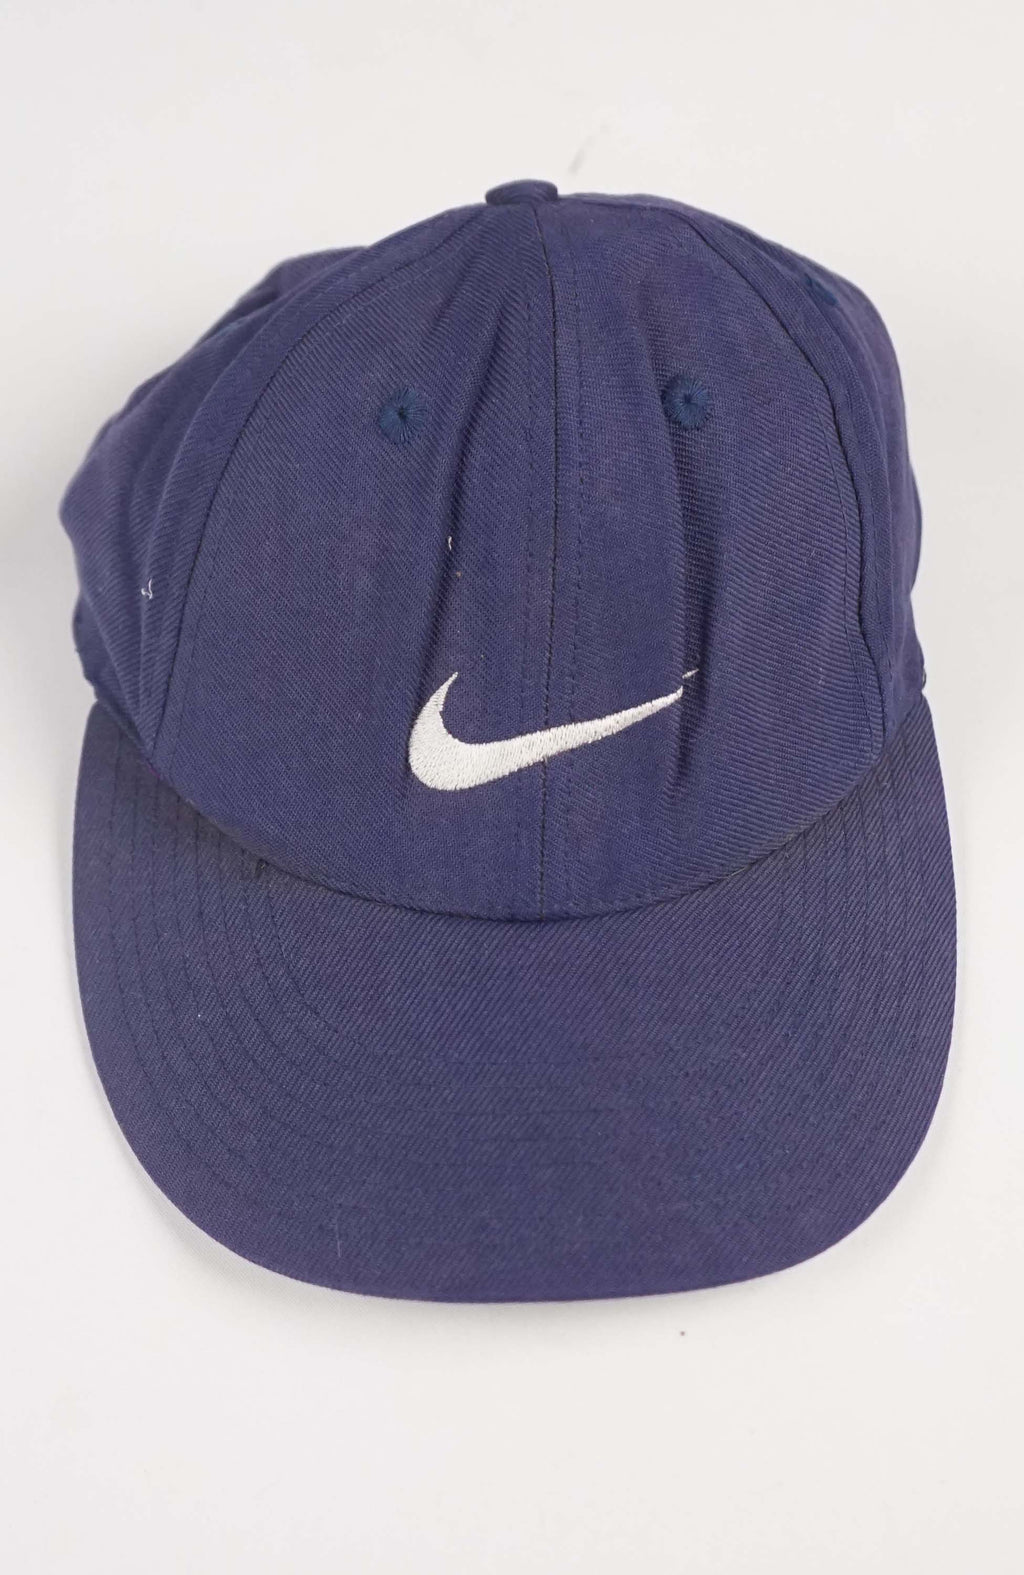 VINTAGE NIKE HAT FITTED 7 3/8